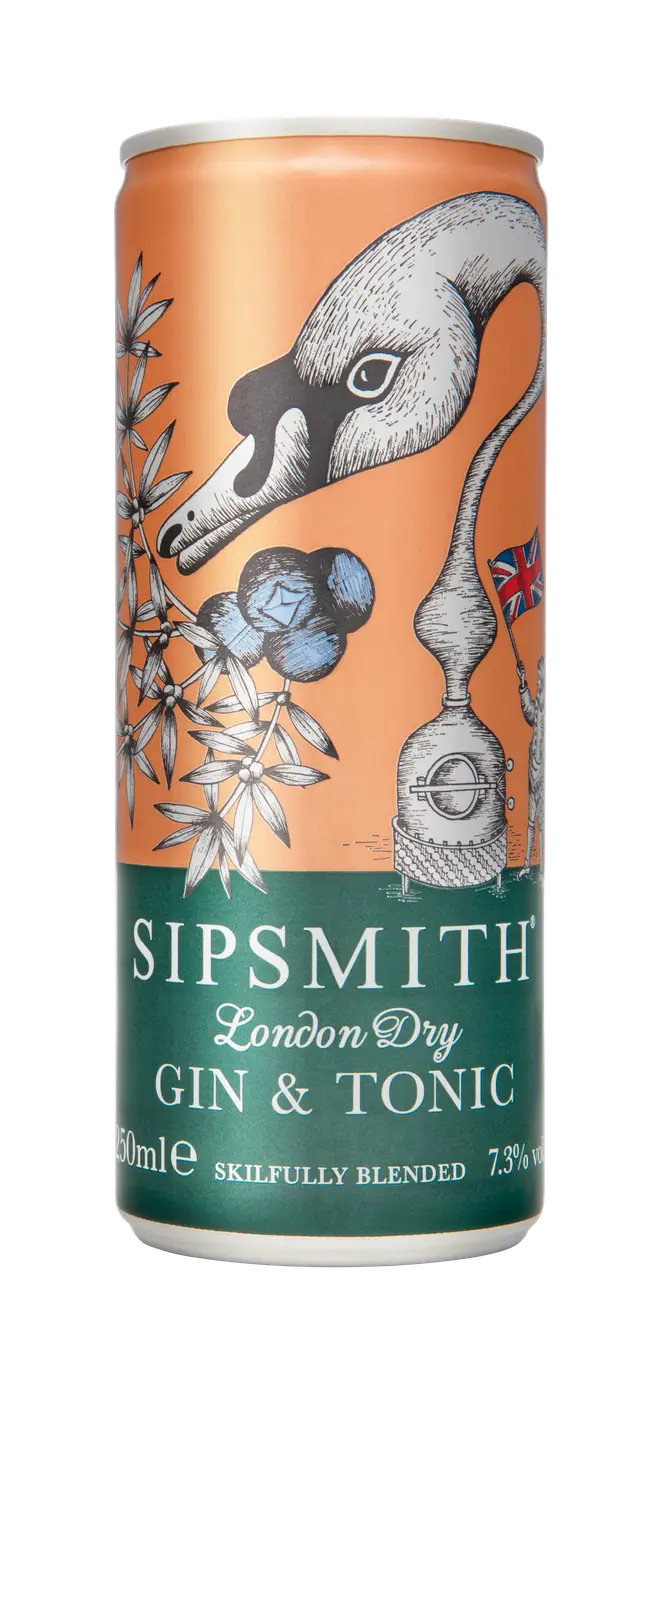 Sipsmith's new gin and tonic in a can ticks all the right boxes